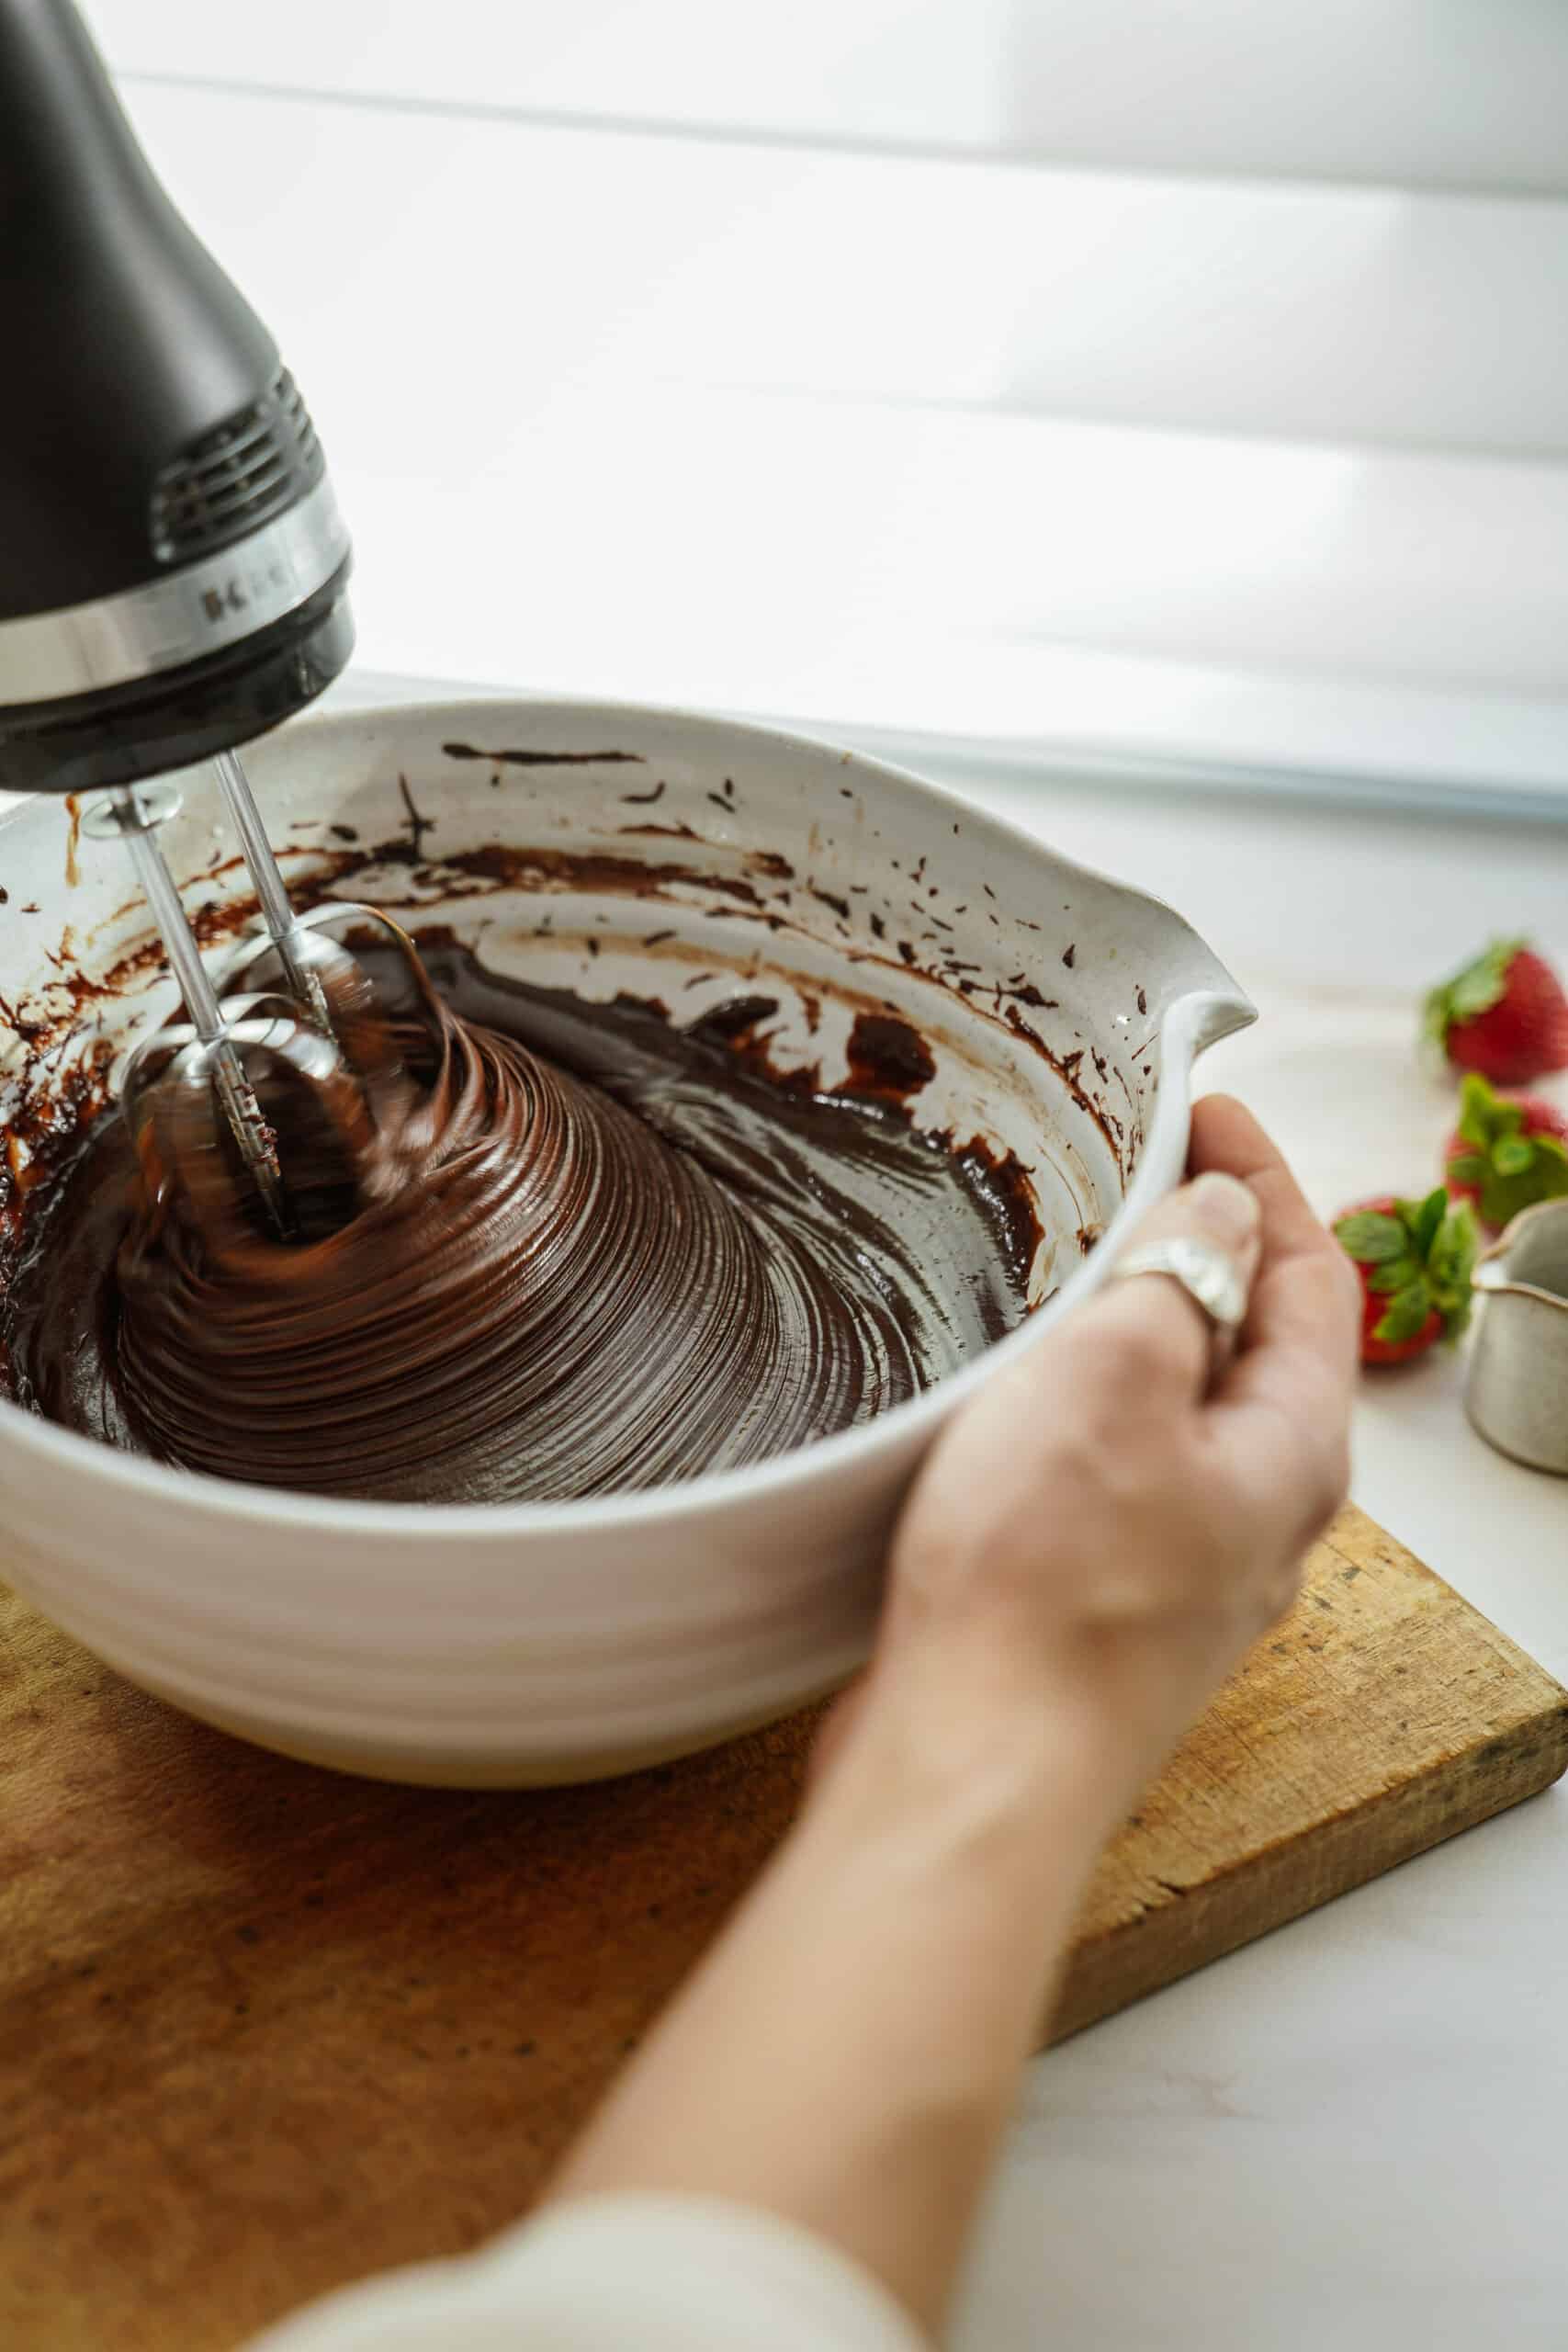 Ingredients for gluten-free chocolate cupcakes being mixed in a mixing bowl